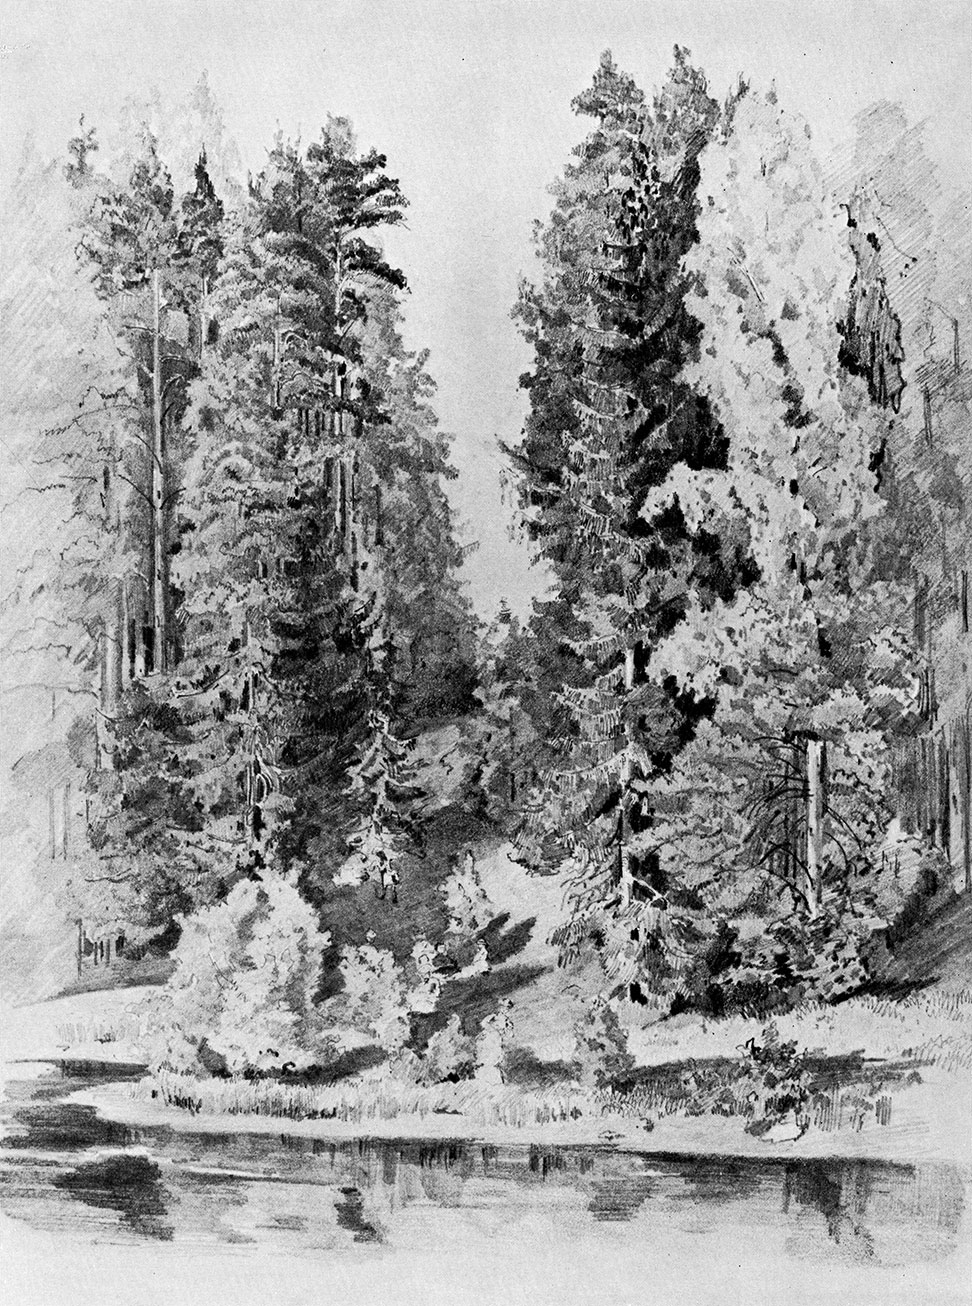 118. The park. 1880s. Lead pencil on paper. 33.1X24.6 cm. The Tretyakov Gallery, Moscow